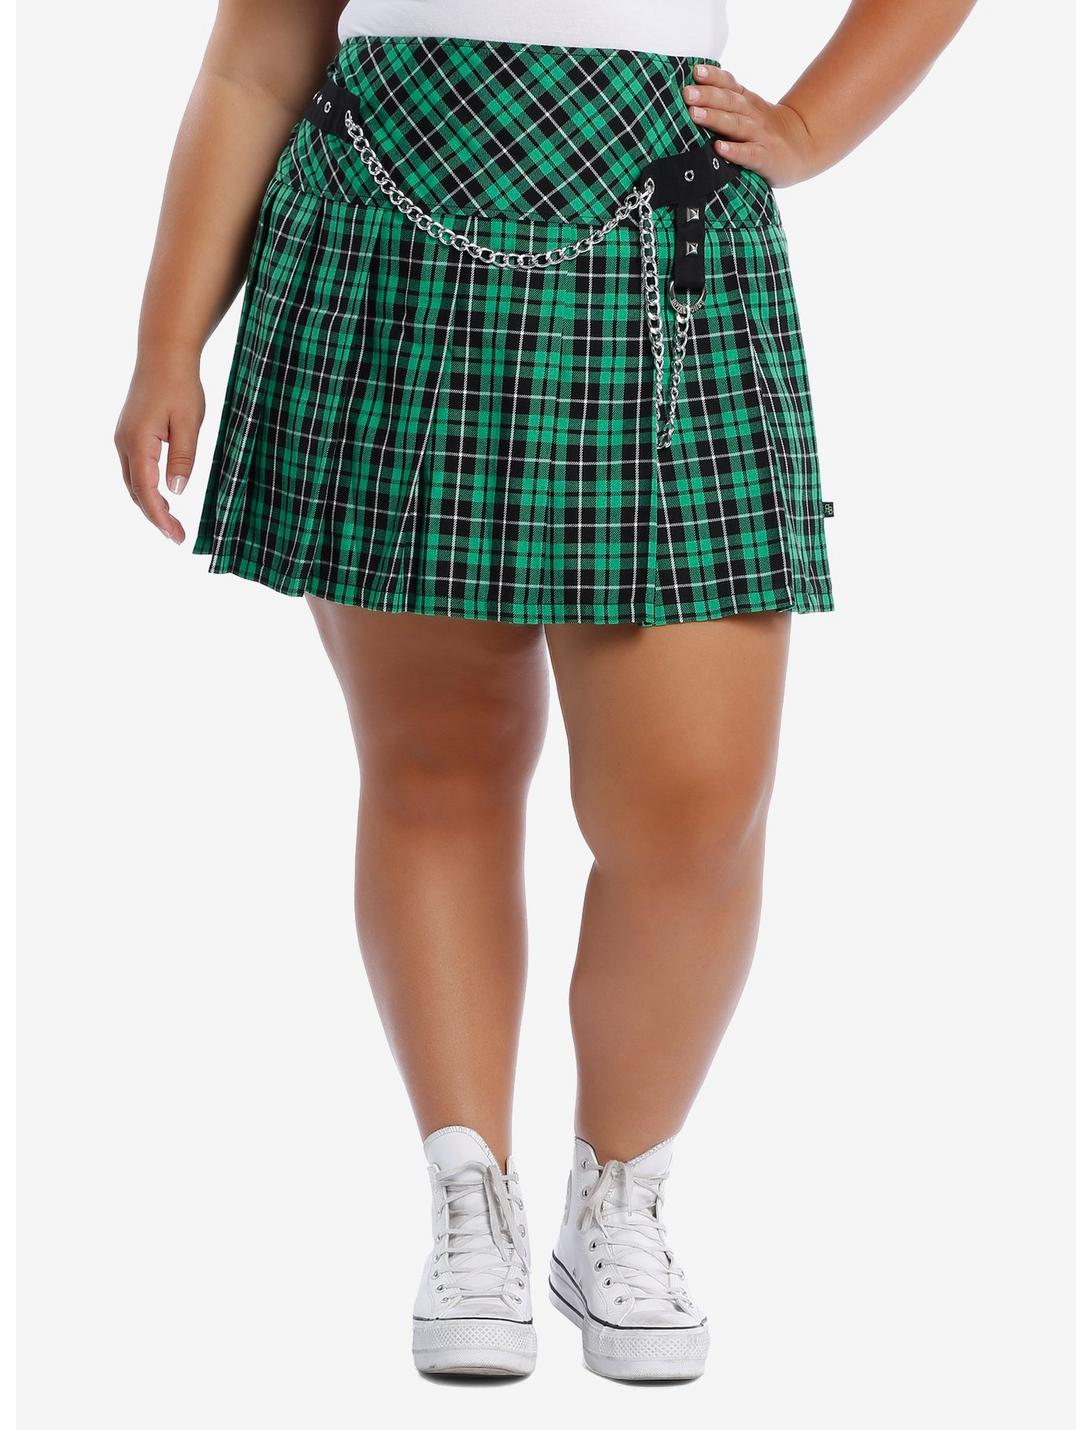 Tripp Green Plaid Skirt With Chains Plus Size, BLACK, hi-res